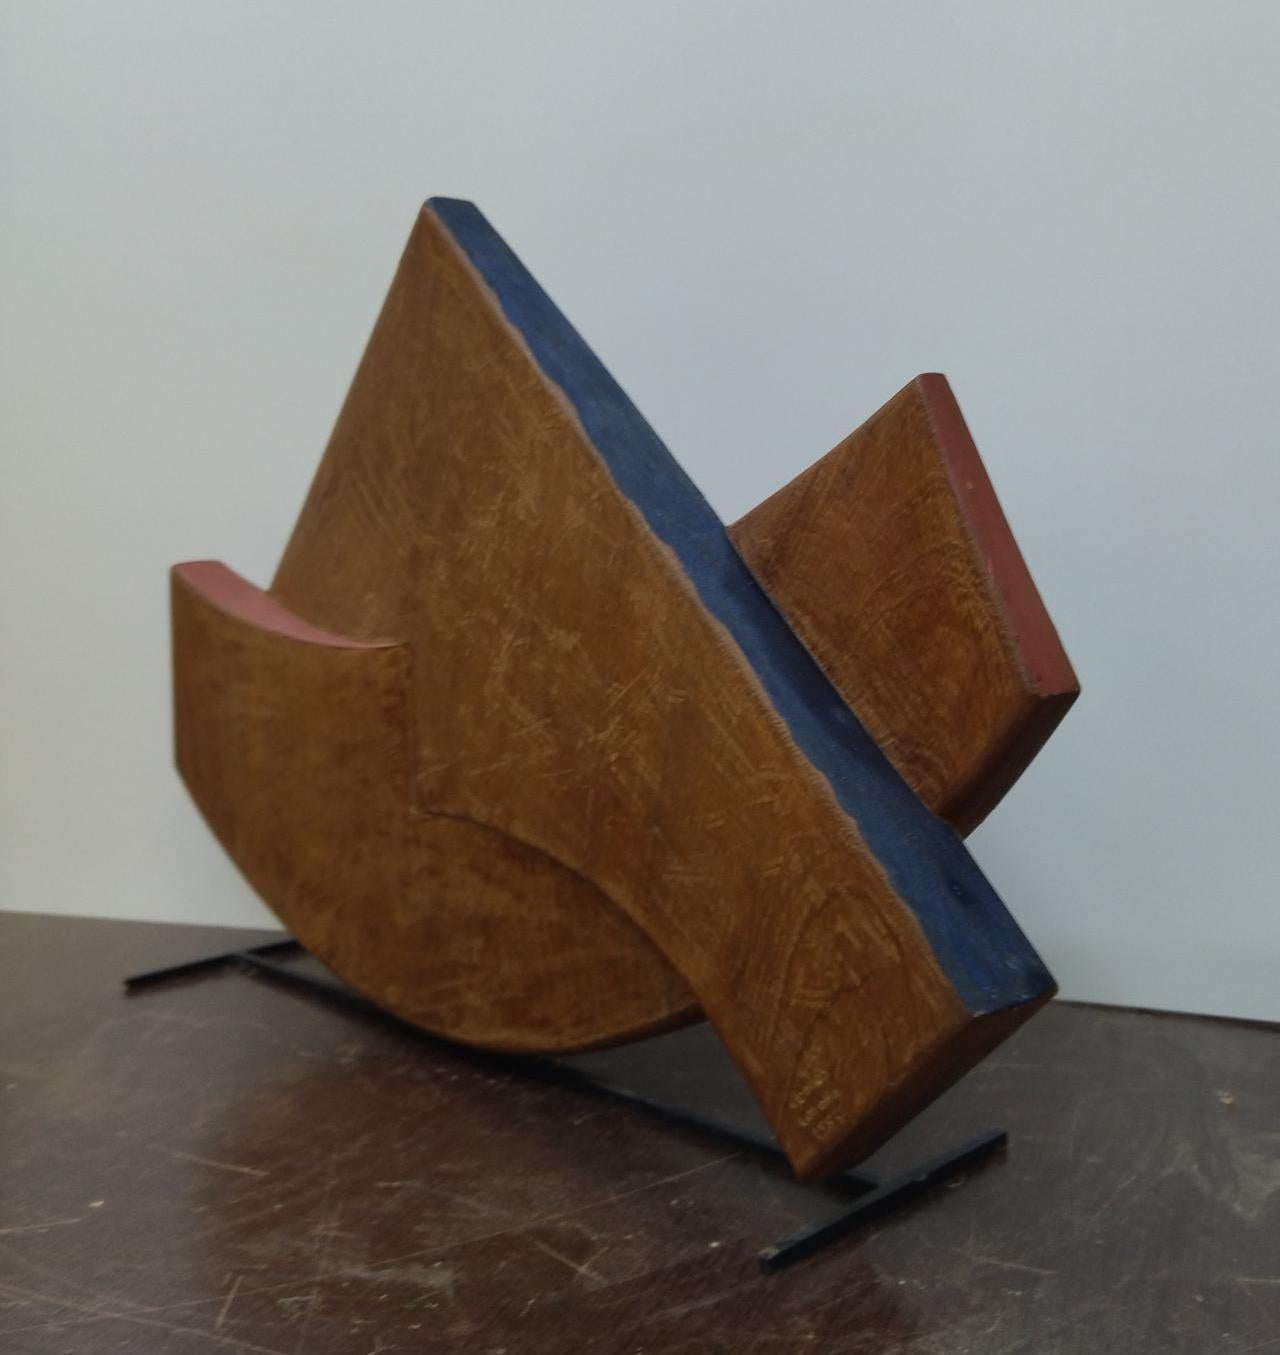  sculpture on wood by Spanish artist CODINA CORONA.
Sculpture of one piece of wood 
Josep Maria Codina Corona (Igualada, 1935 - Barcelona, 2006) was a Catalan sculptor. He studied at the Llotja School of Barcelona (1955) and later at the Artistic